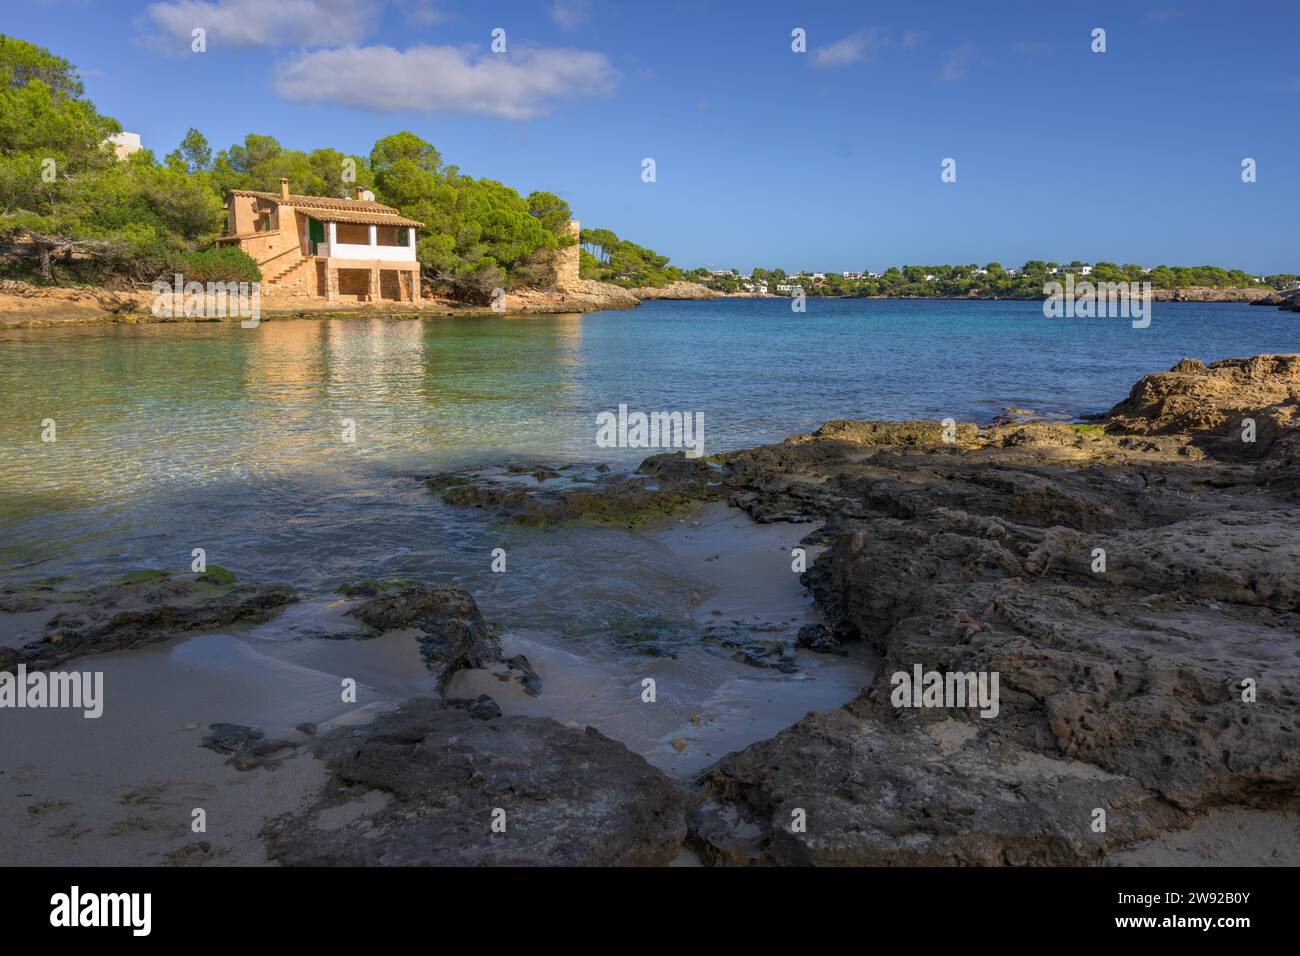 View of a small pier typical of the mediterranean beaches Stock Photo